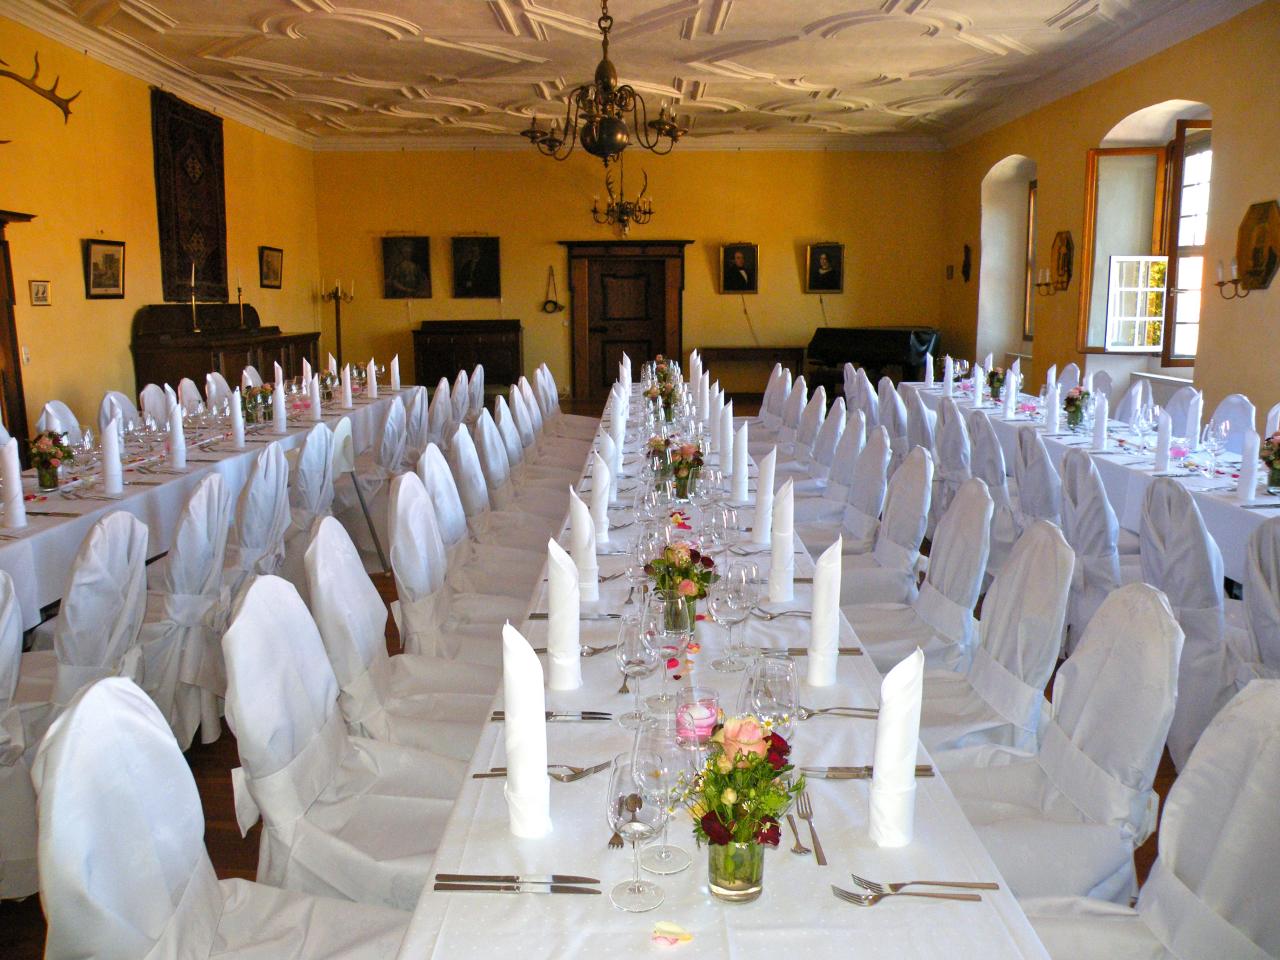 a formal table is set for an event